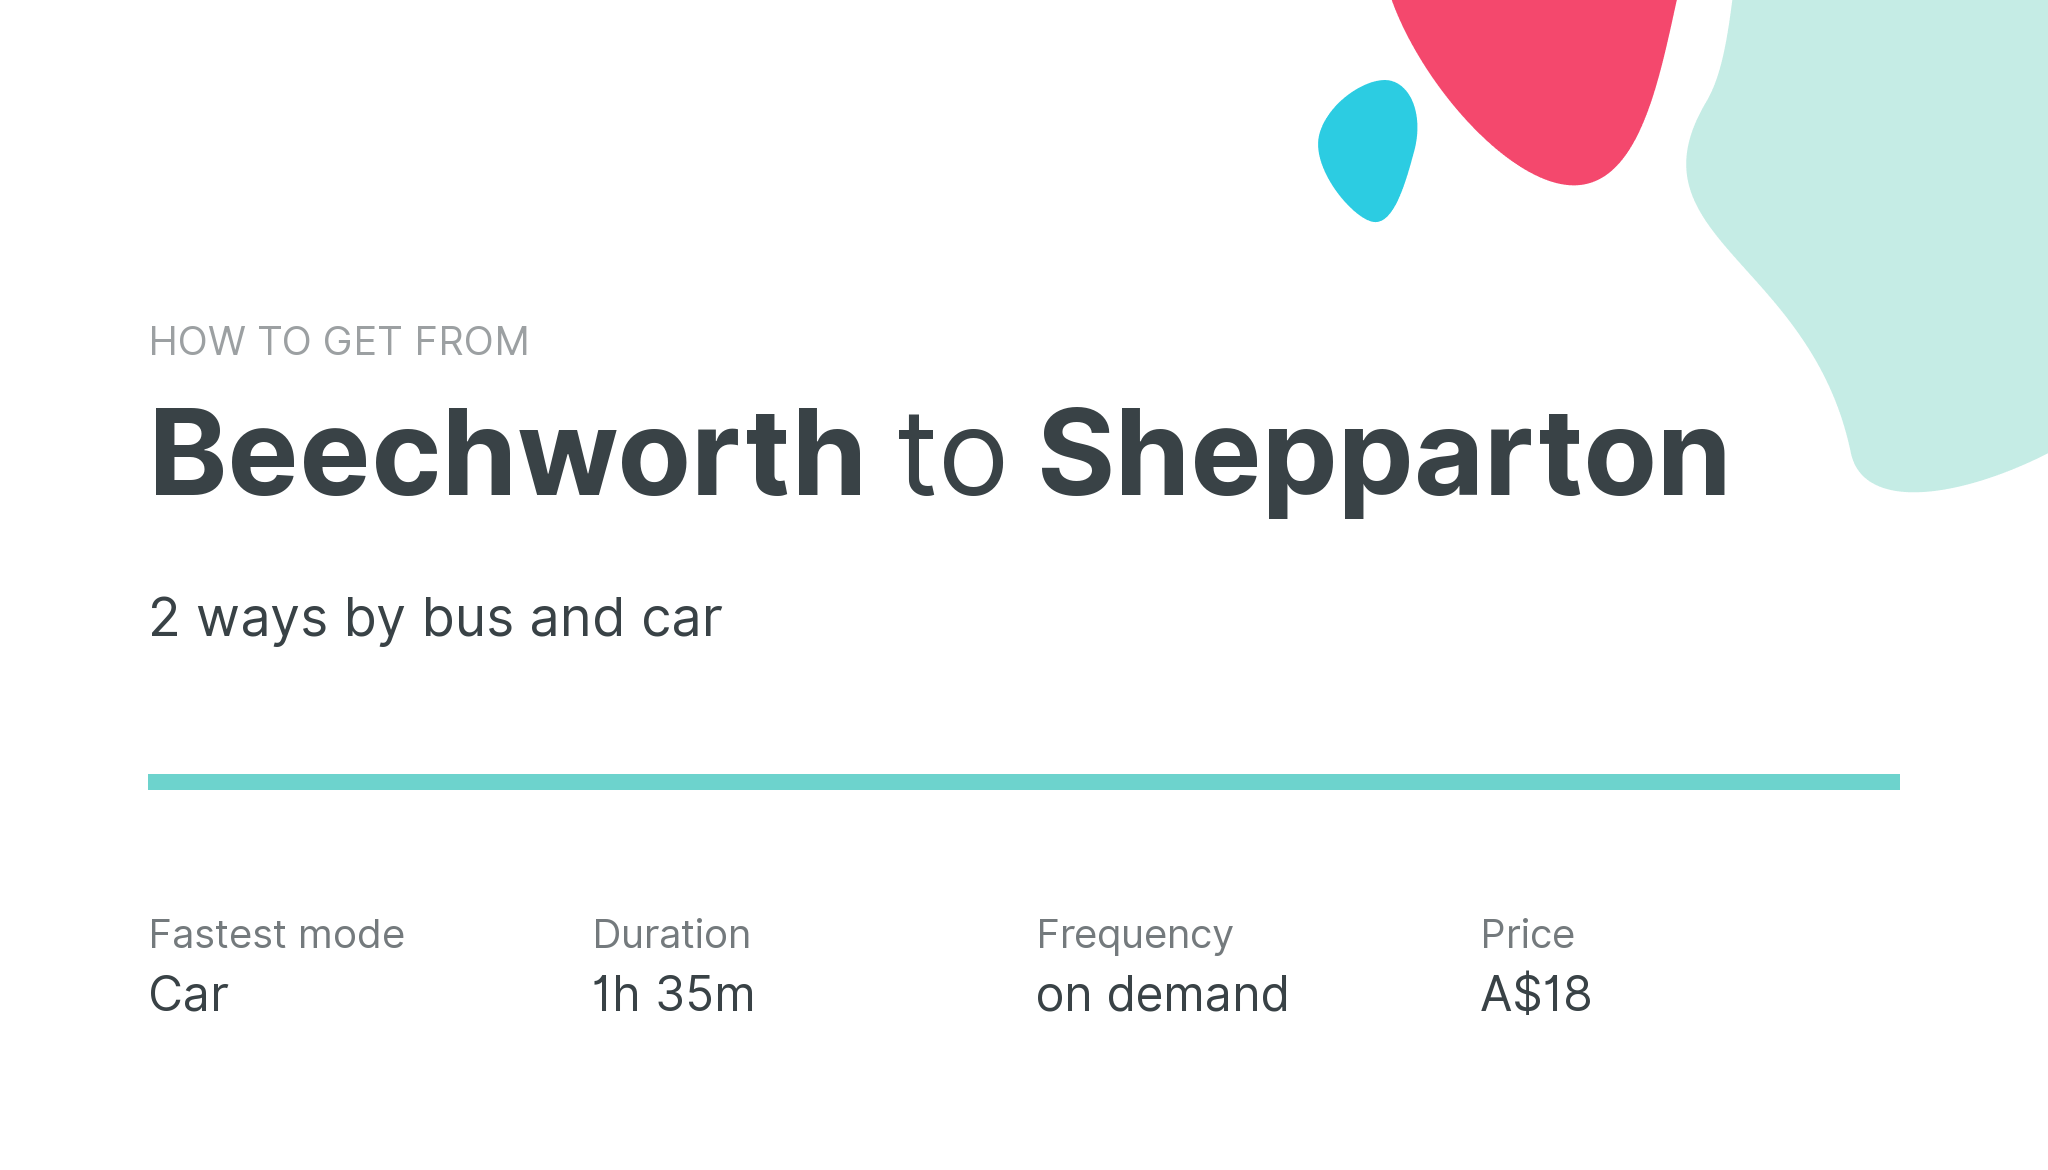 How do I get from Beechworth to Shepparton